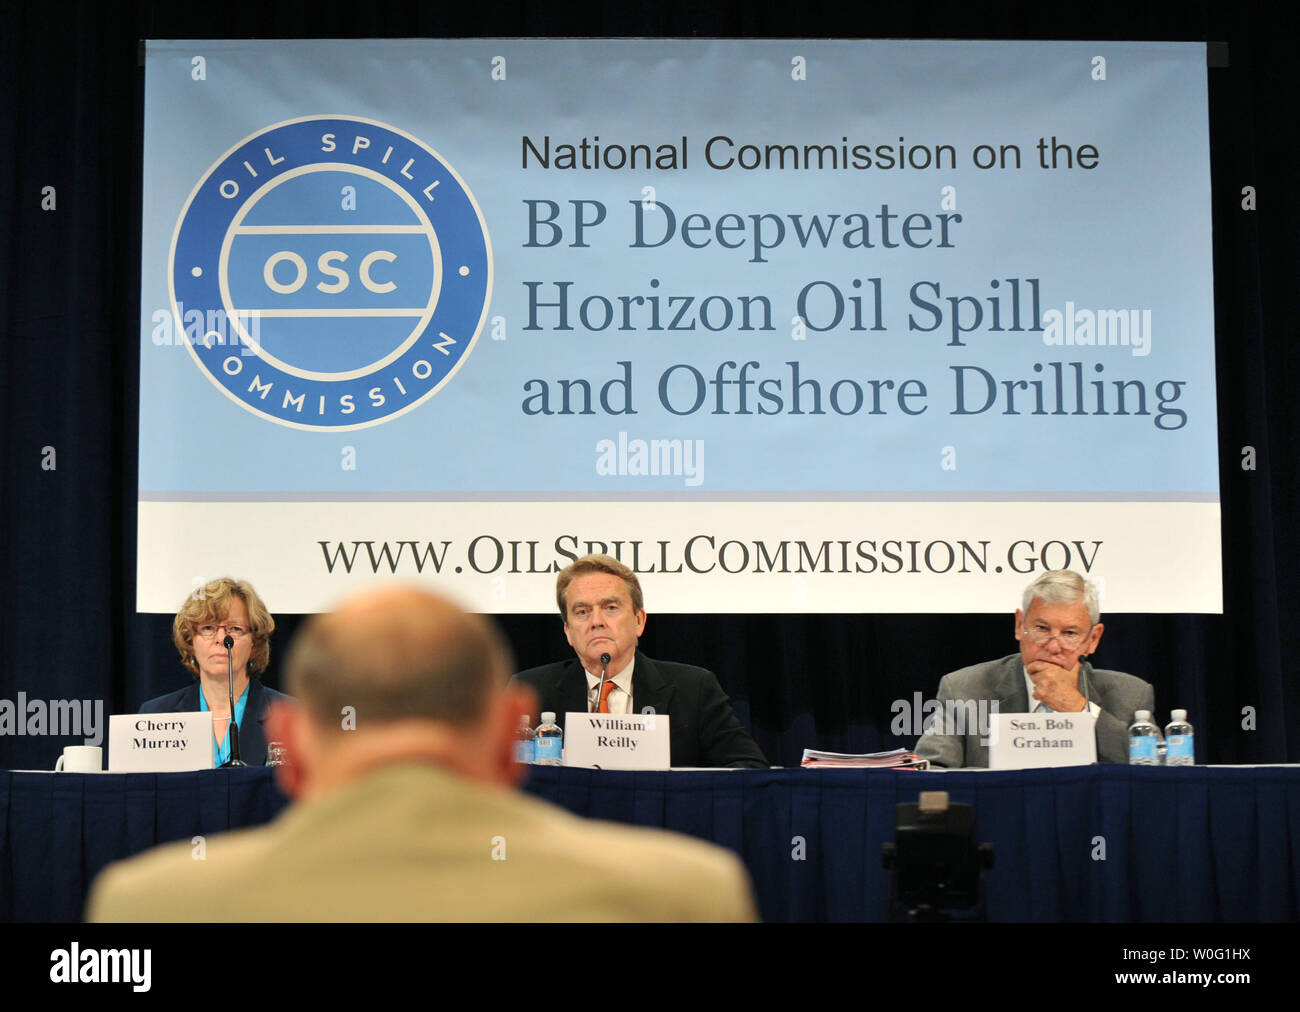 William Reilly (C) and Bob Graham (R) Chairmen of the National Commission on the BP Deepwater Horizon Oil Spill and Offshore Drilling, and commission member Cherry Murray listen as Retired Adm. Thad Allen, national incident commander for the Gulf oil spill, testifies during a panel discussion on the decision making within the Unified Command during a public hearing on the response to the BP Deepwater Horizion oil spill, in Washington on September, 27, 2010.   UPI/Kevin Dietsch Stock Photo